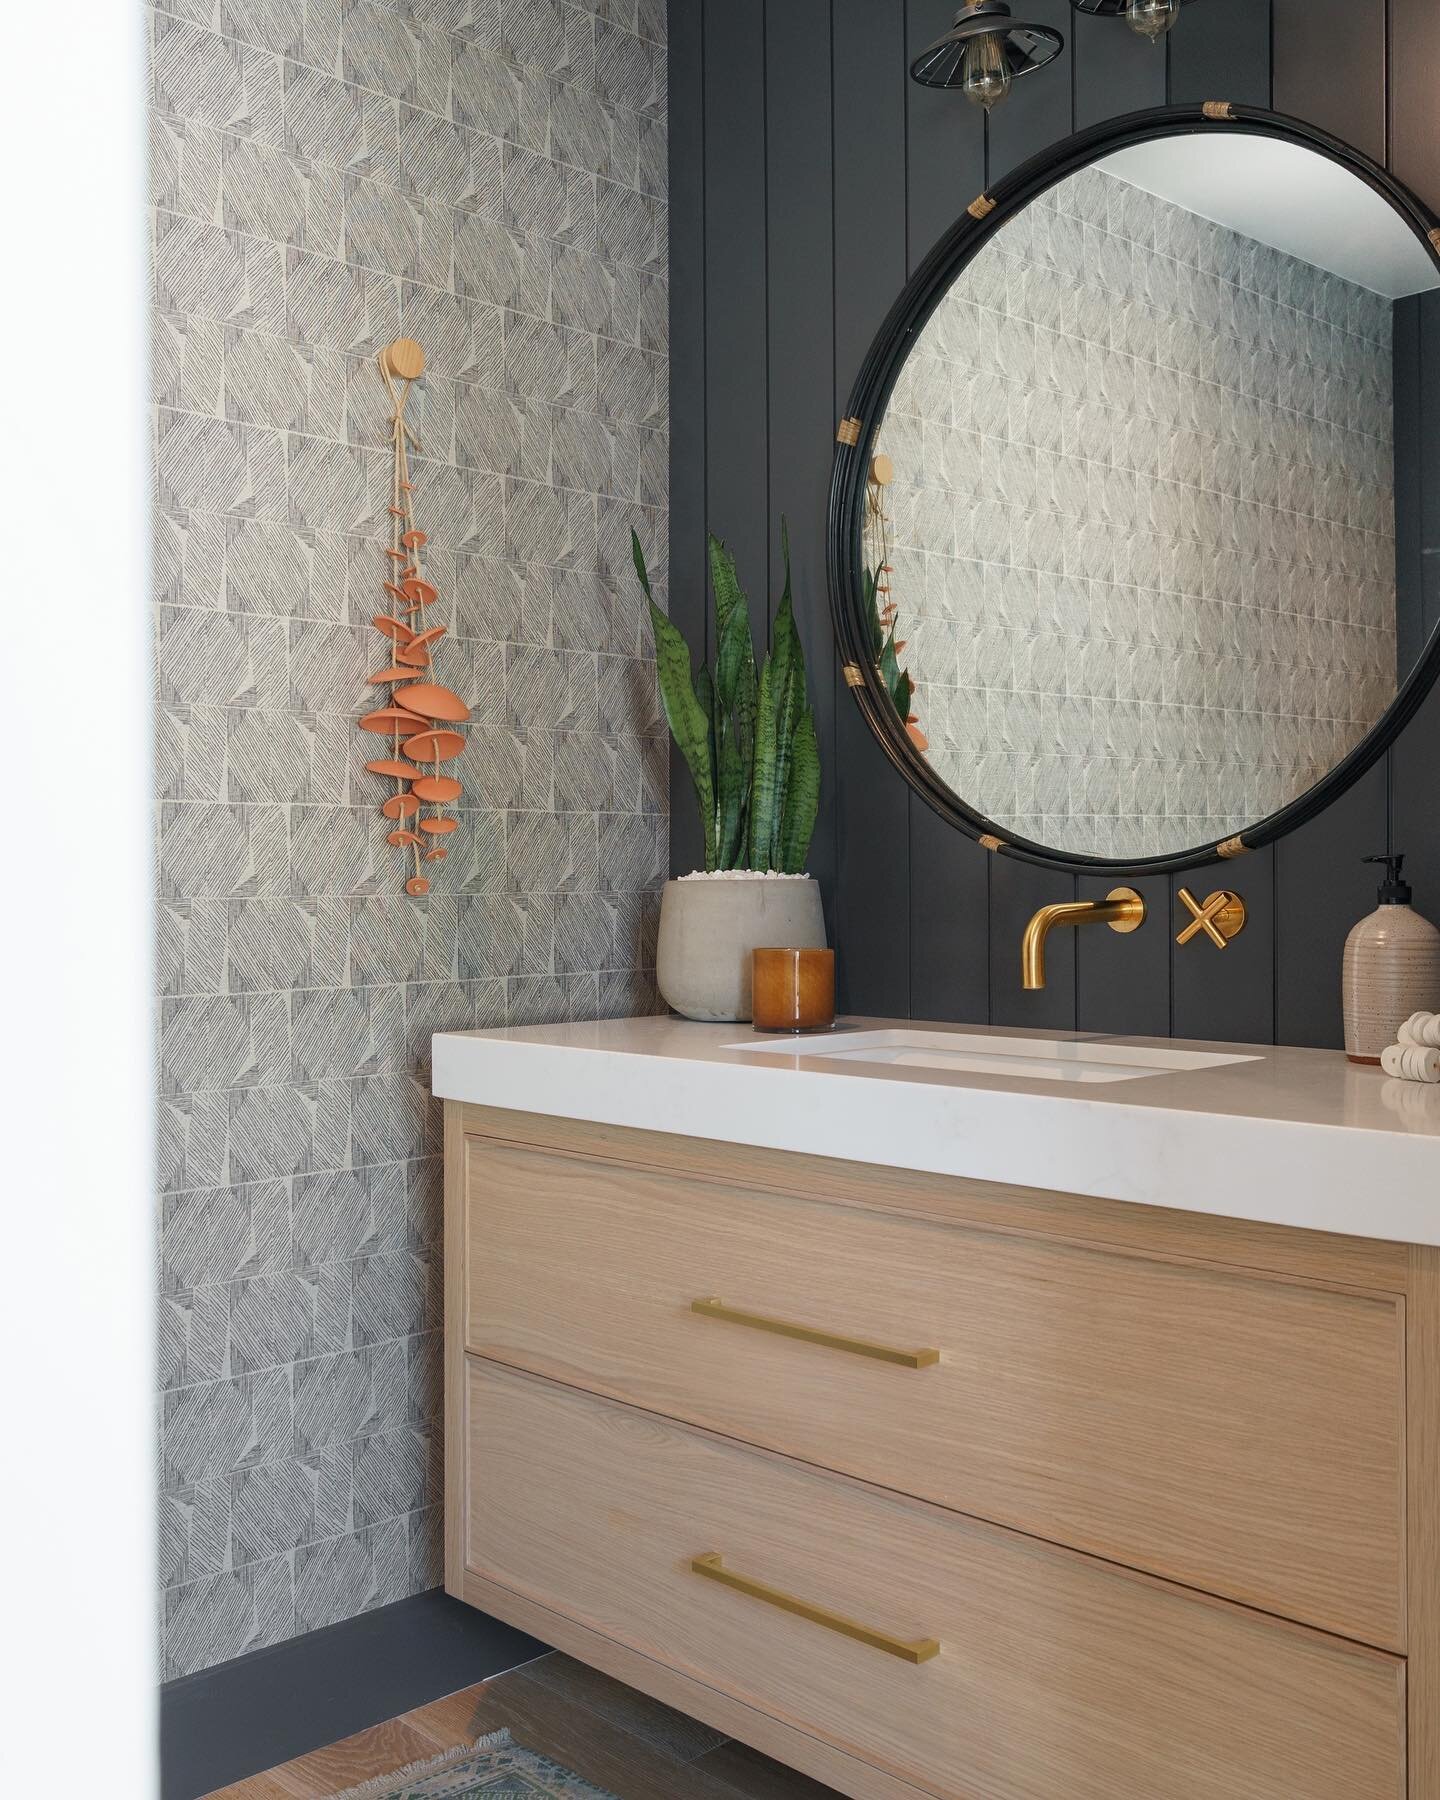 Mixing texture, contrast and warmth for a #trad powder punch. Yep - yes please.

Speaking of powder bathrooms - we finished a few projects with some amaze-ball clients with some of the cutest bathrooms! Coming 🔜 

Design: [FIXE]
Photo: @charlottelea